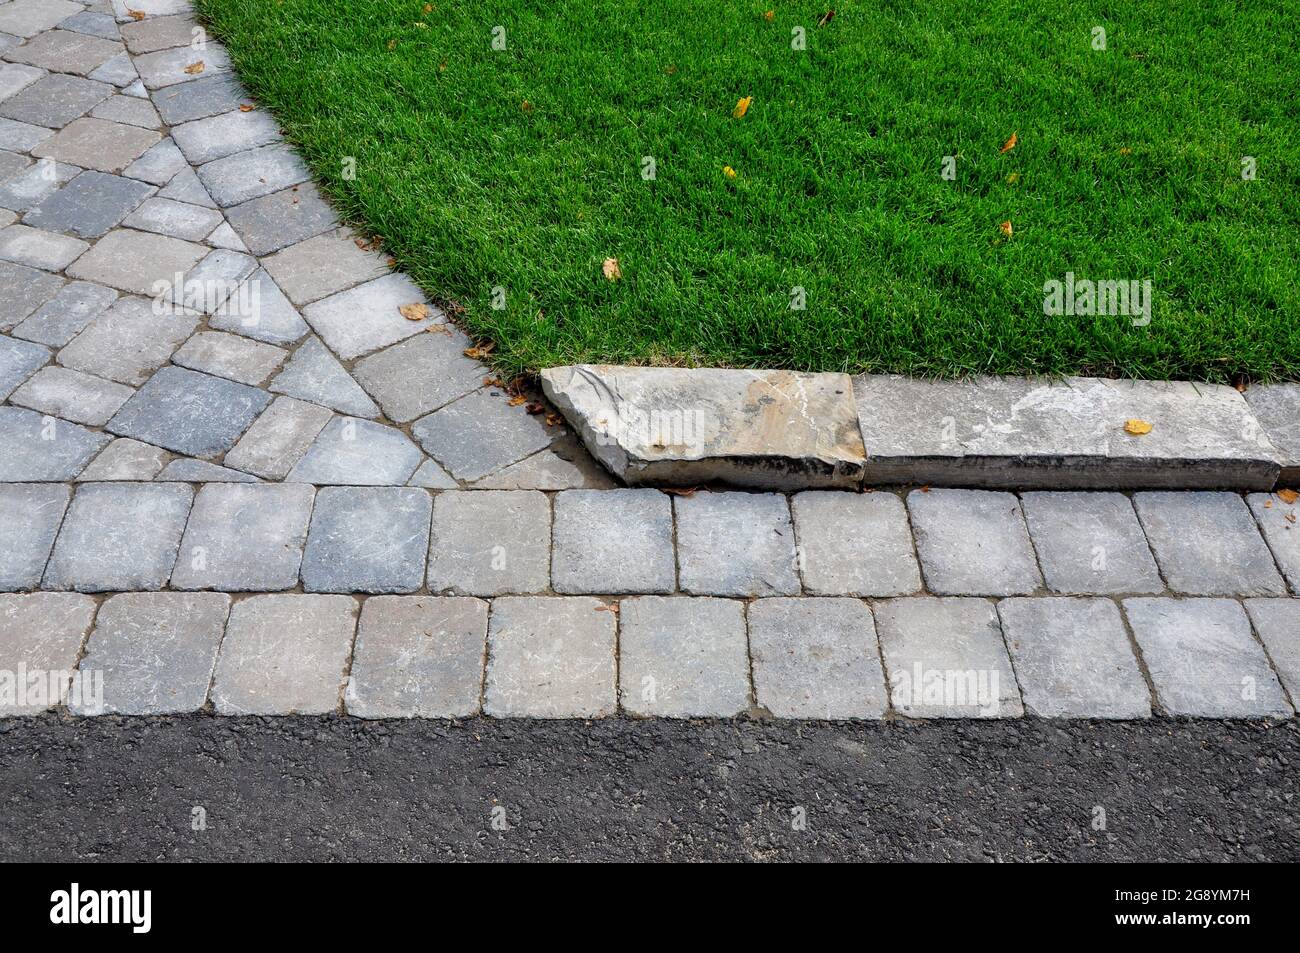 This landscape project shows a professionally designed and crafted transition from walkway to driveway, and uses natural stone curbing. Stock Photo